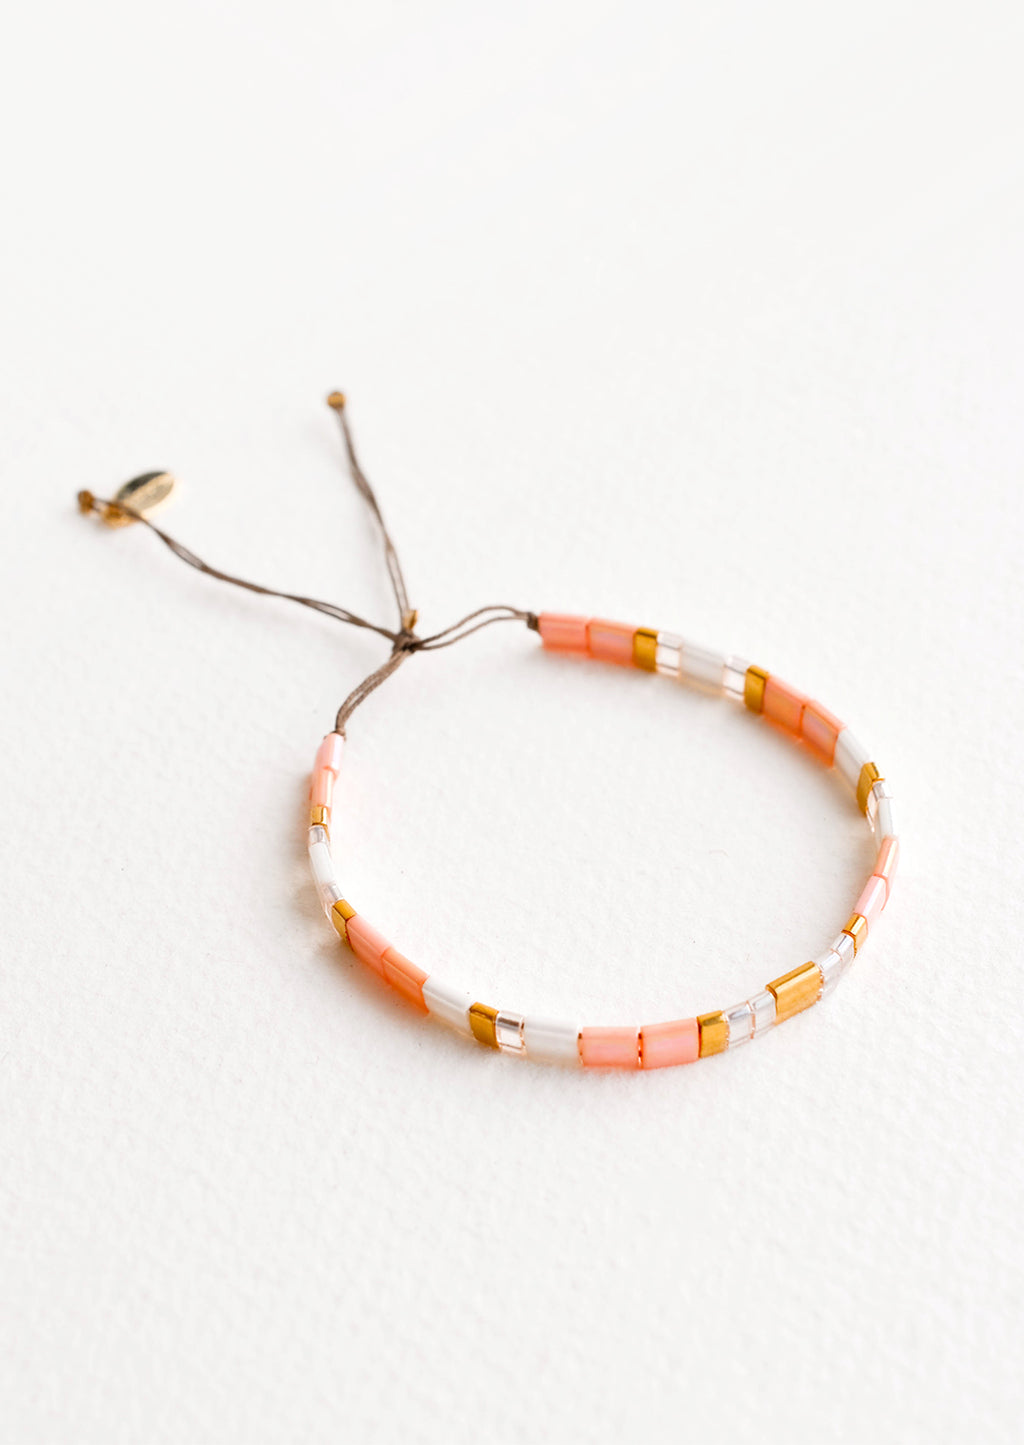 Peach: Bracelet featuring flat peach and white glass beads interspersed with flat gold bead on an adjustable cord.